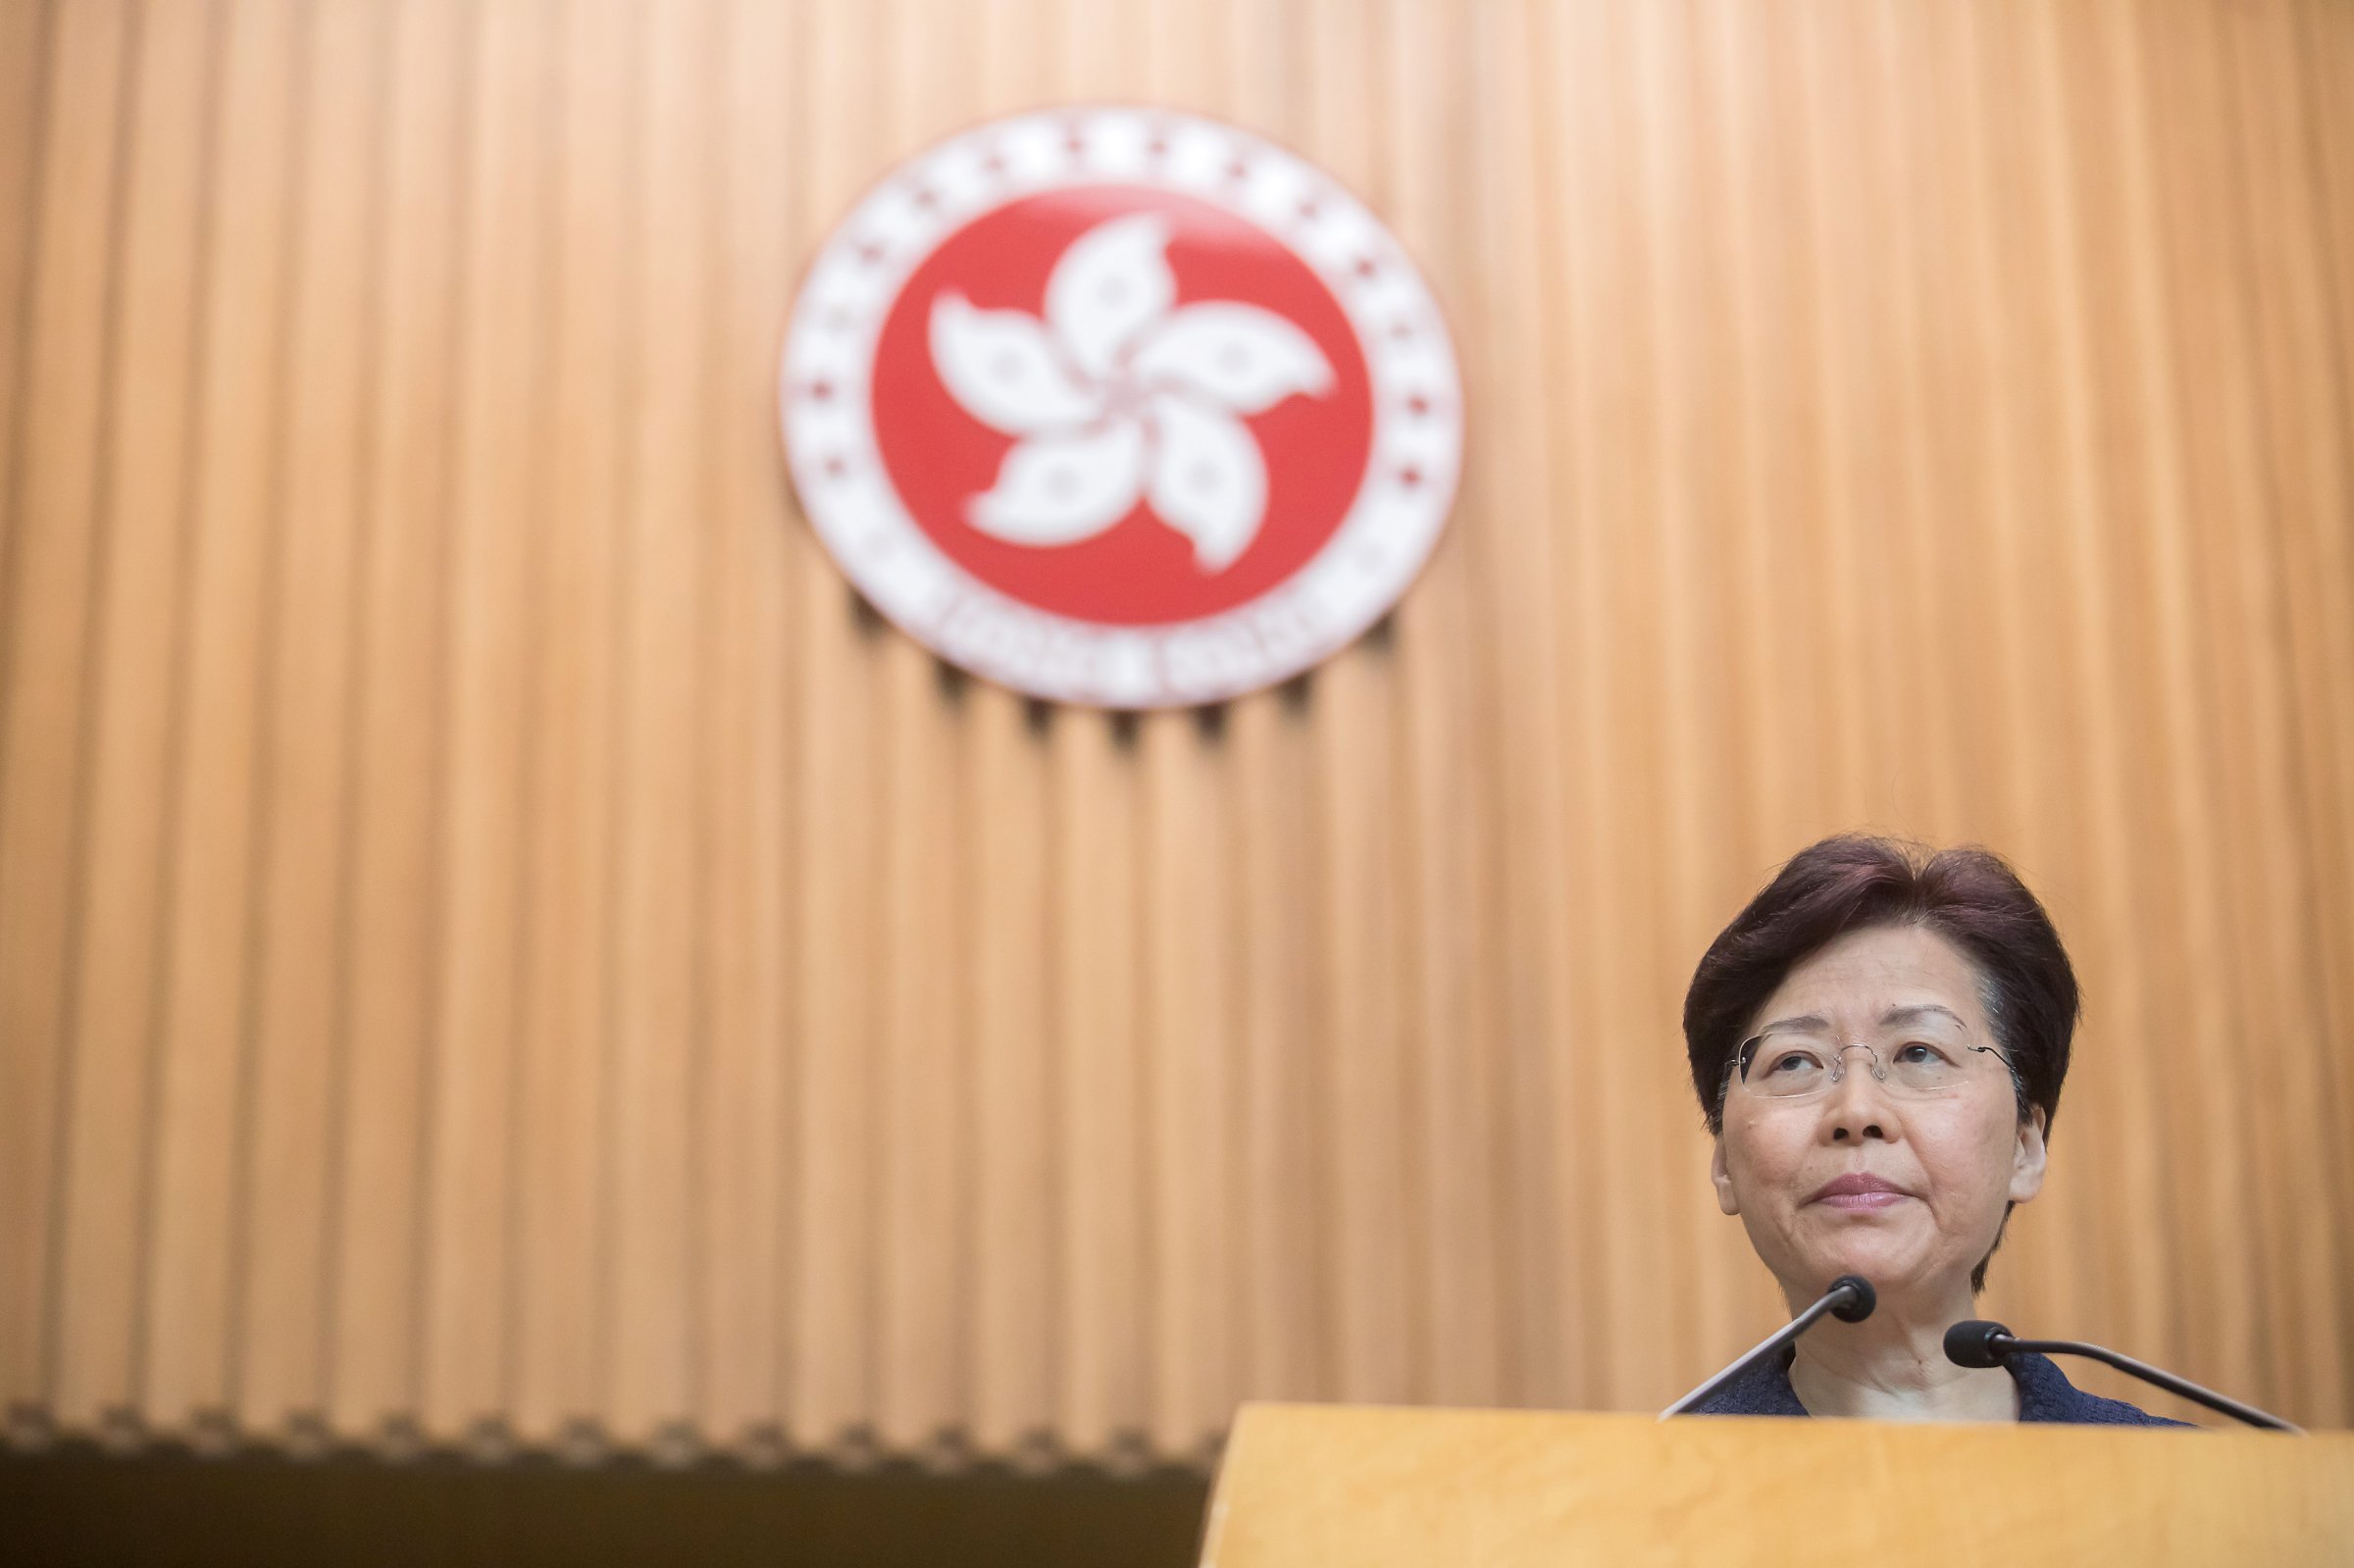 Hong Kong Chief Executive Carrie Lam News Conference Following Peaceful Mass March in Rain